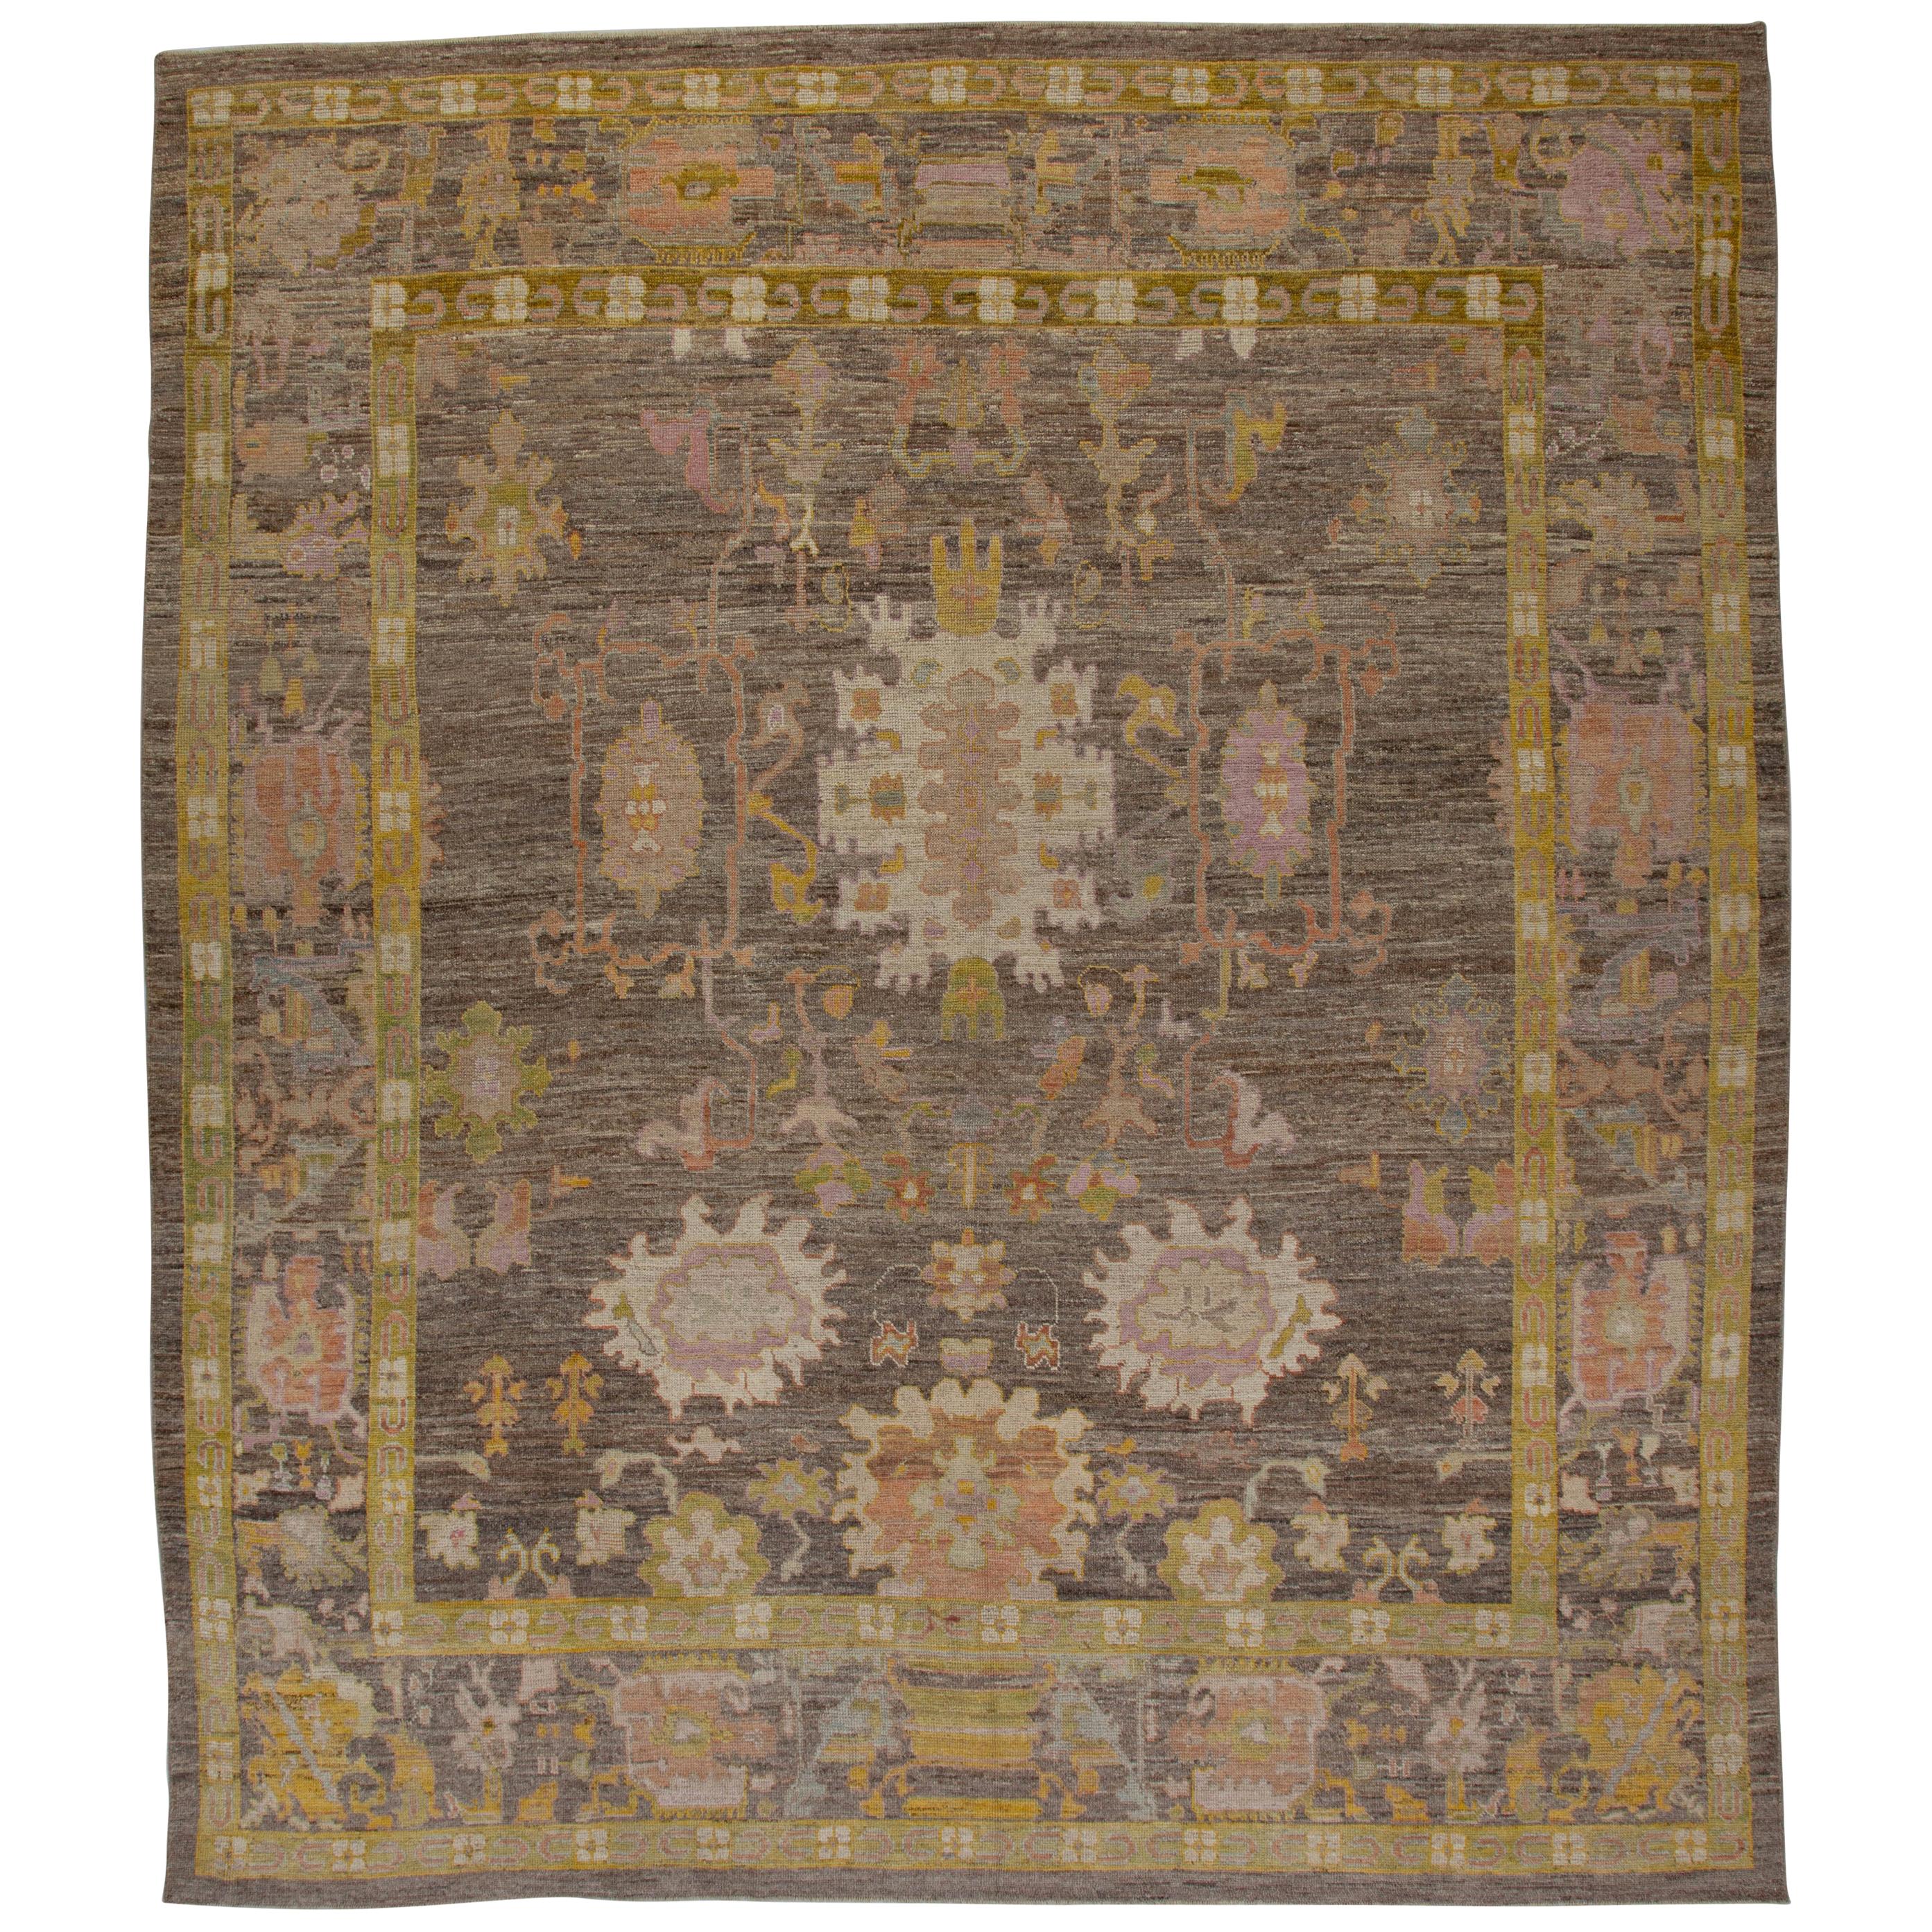 Contemporary Turkish Oushak Rug with a Brown Field and Gold Borders